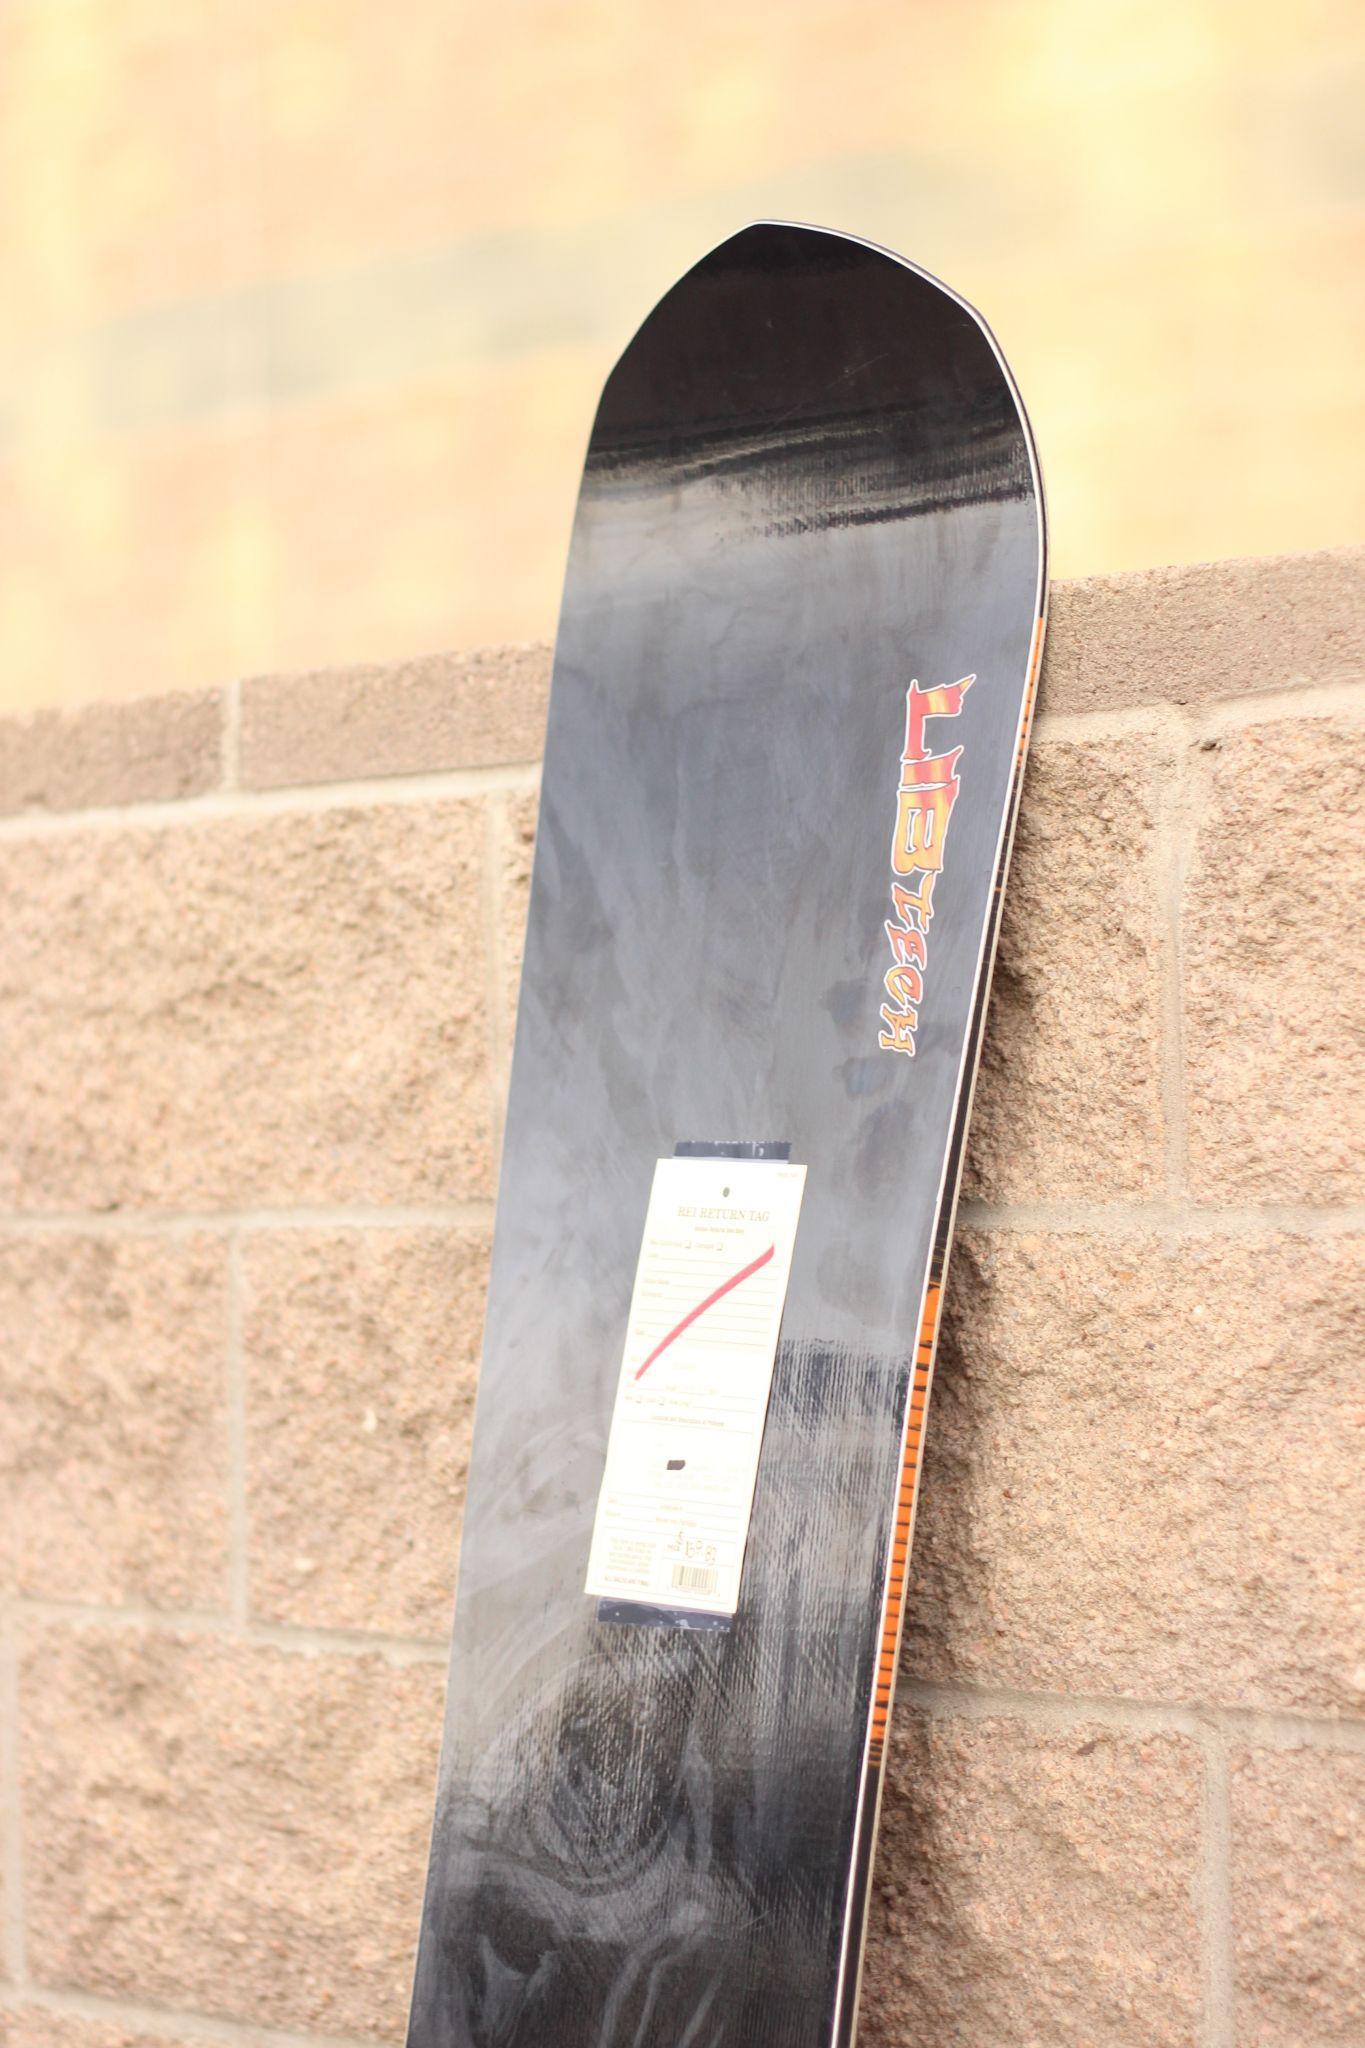 Shoppers can find great bargains on used gear at the REI Garage Sale. This snowboard will be one of the items sold at the Garage Sale on March 12. Photo by Jenna Fischer.